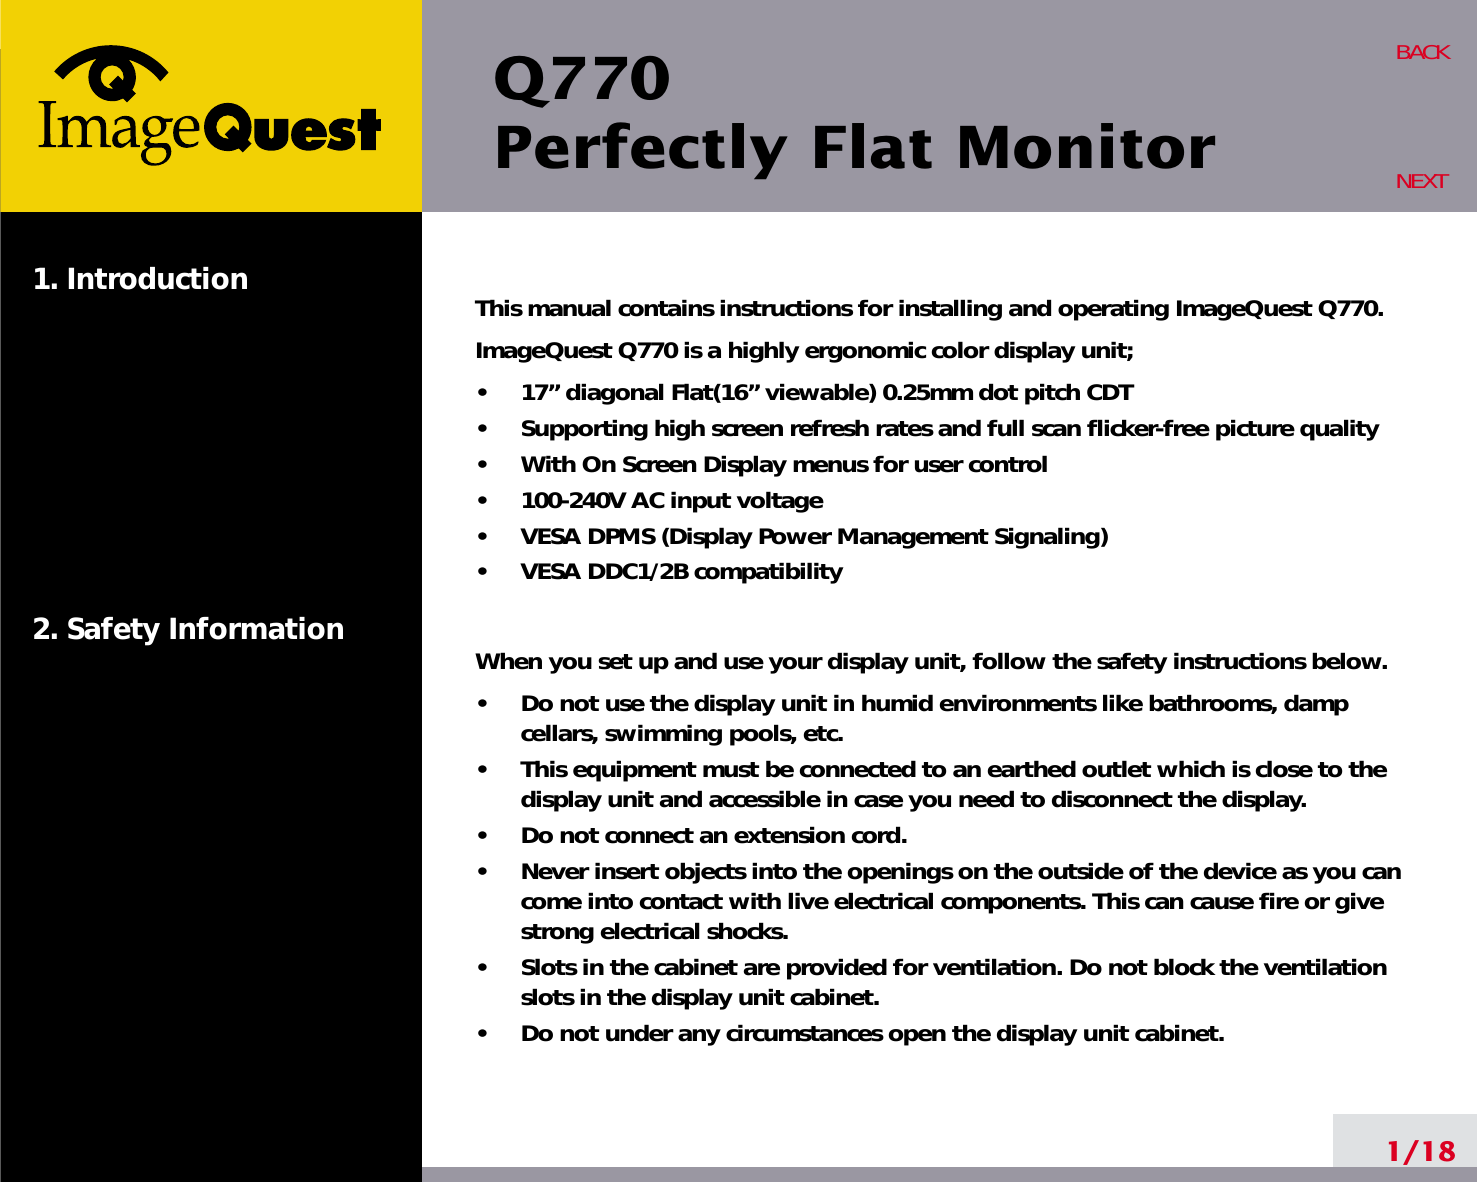 Q770Perfectly Flat Monitor1. Introduction2. Safety Information1/18BACKNEXTThis manual contains instructions for installing and operating ImageQuest Q770. ImageQuest Q770 is a highly ergonomic color display unit; •     17” diagonal Flat(16” viewable) 0.25mm dot pitch CDT•     Supporting high screen refresh rates and full scan flicker-free picture quality•     With On Screen Display menus for user control•     100-240V AC input voltage•     VESA DPMS (Display Power Management Signaling)•     VESA DDC1/2B compatibilityWhen you set up and use your display unit, follow the safety instructions below.•     Do not use the display unit in humid environments like bathrooms, dampcellars, swimming pools, etc.•     This equipment must be connected to an earthed outlet which is close to thedisplay unit and accessible in case you need to disconnect the display.•     Do not connect an extension cord.•     Never insert objects into the openings on the outside of the device as you cancome into contact with live electrical components. This can cause fire or givestrong electrical shocks.•     Slots in the cabinet are provided for ventilation. Do not block the ventilationslots in the display unit cabinet.•     Do not under any circumstances open the display unit cabinet.